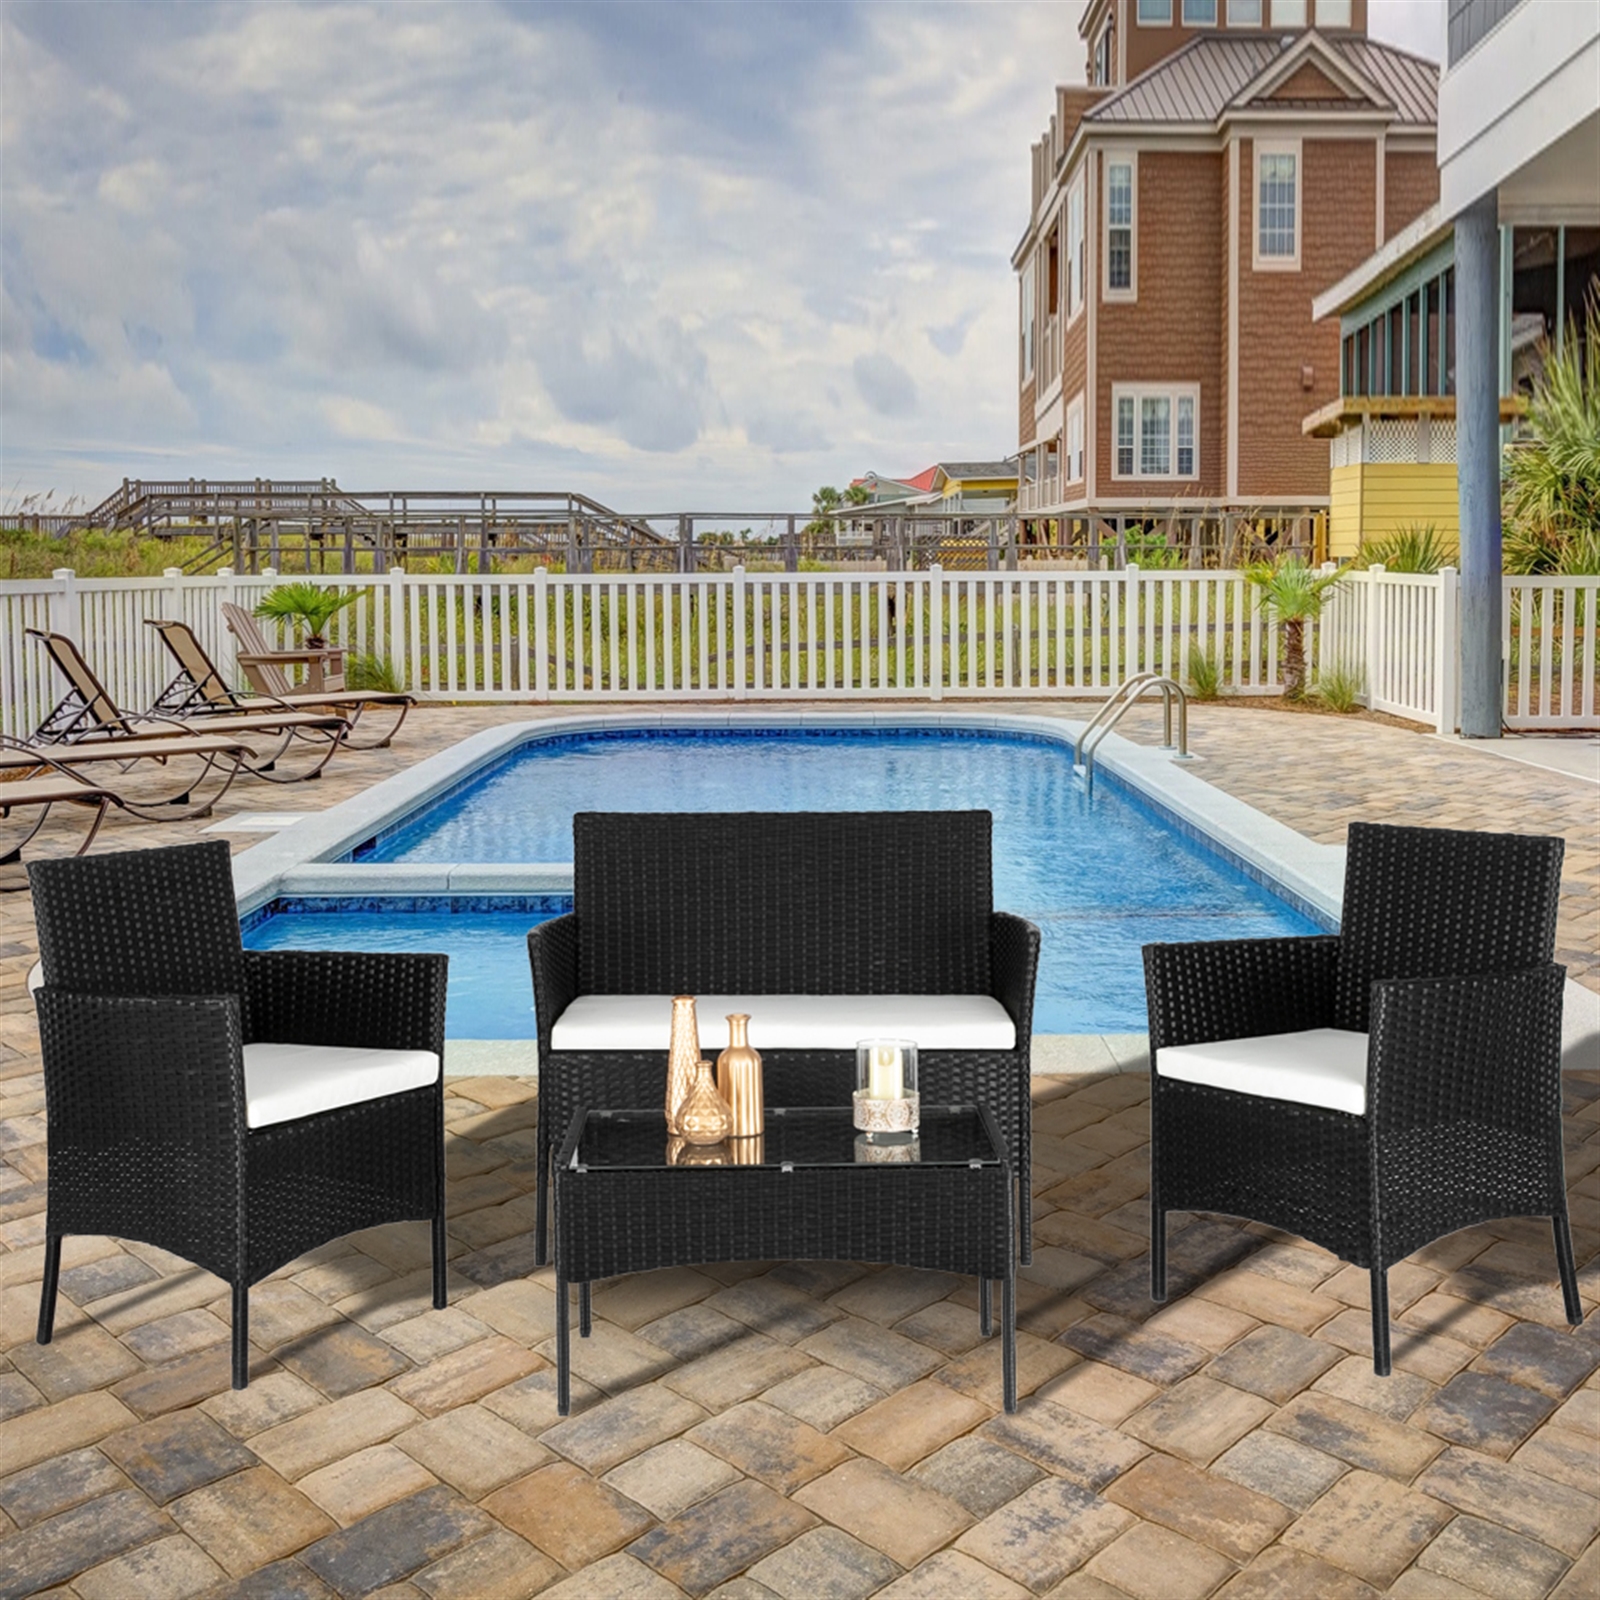 Outdoor Patio Set, iRerts Modern 4 Pieces Front Porch Furniture Sets, Rattan Wicker Patio Furniture Set with Beige Cushion, Table, Patio Conversation Set for Backyard Garden Poolside, Black, R2942 - image 2 of 8